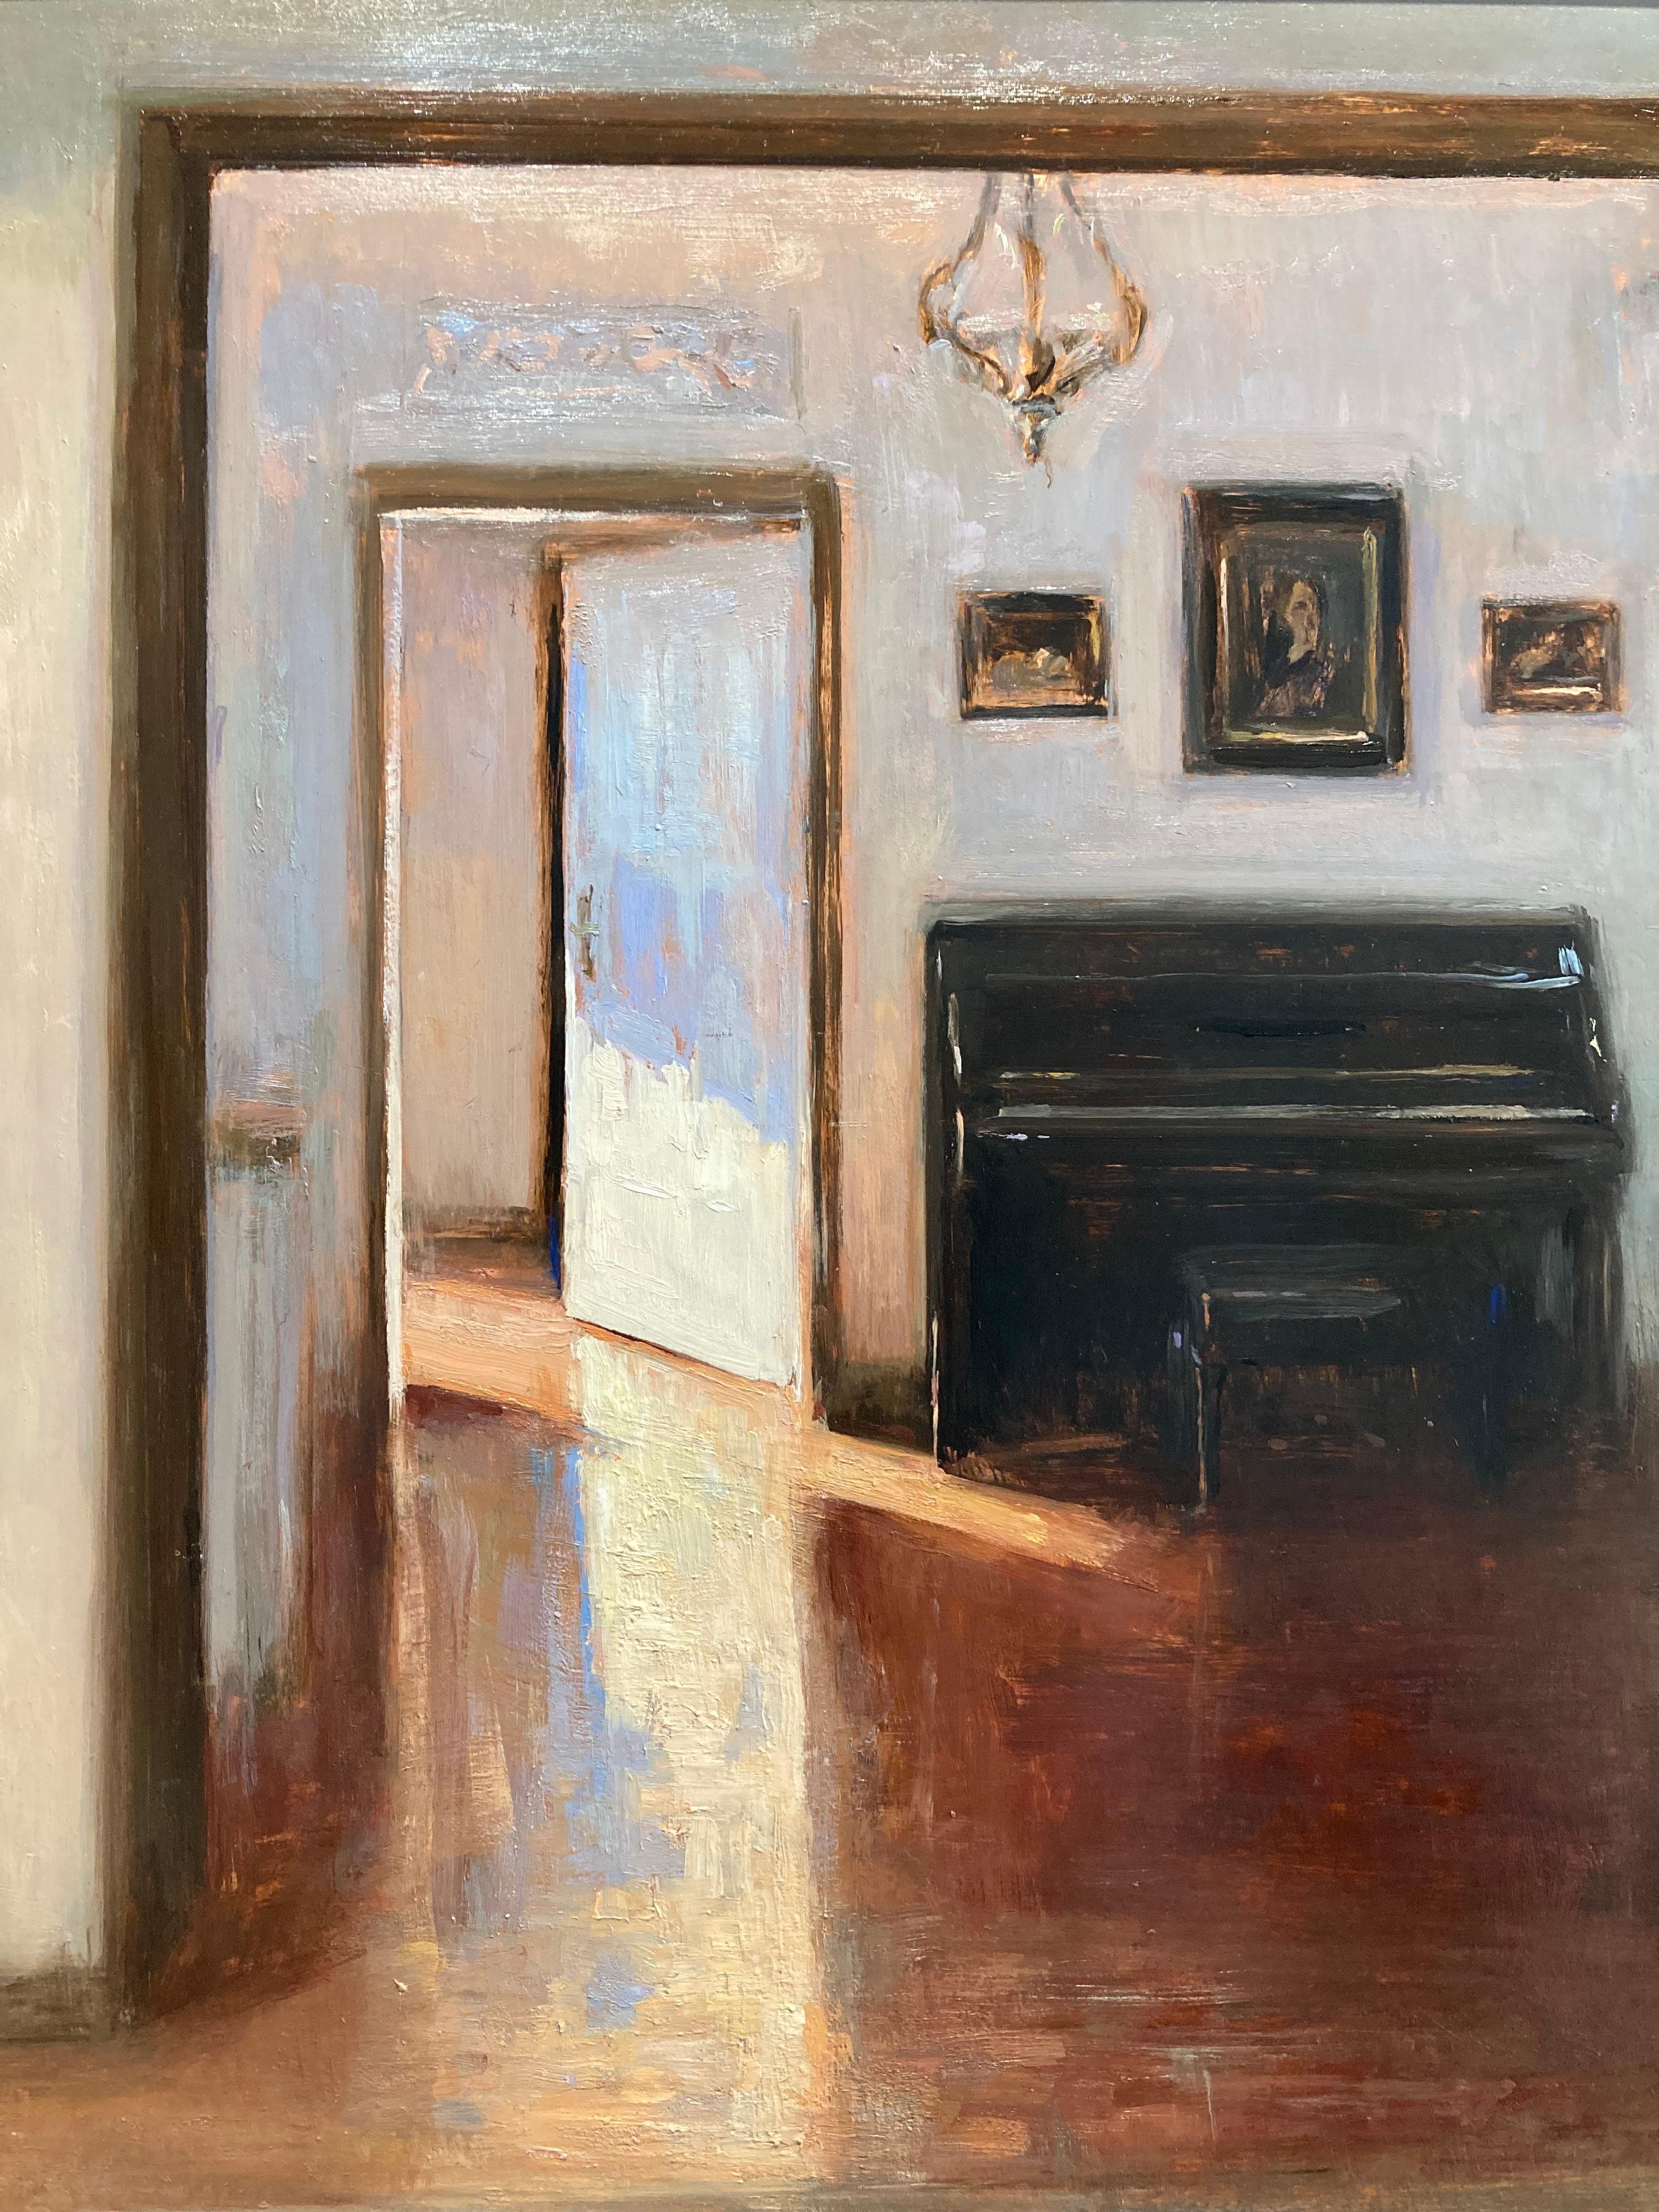 Hammershoi’s successful influence is felt in Franklin’s  “The Sound of Silence” as she paints an interior with more profundity than before.  Franklin, happily, has moved into a farmhouse and her interiors reflect an expansiveness as a result. Here